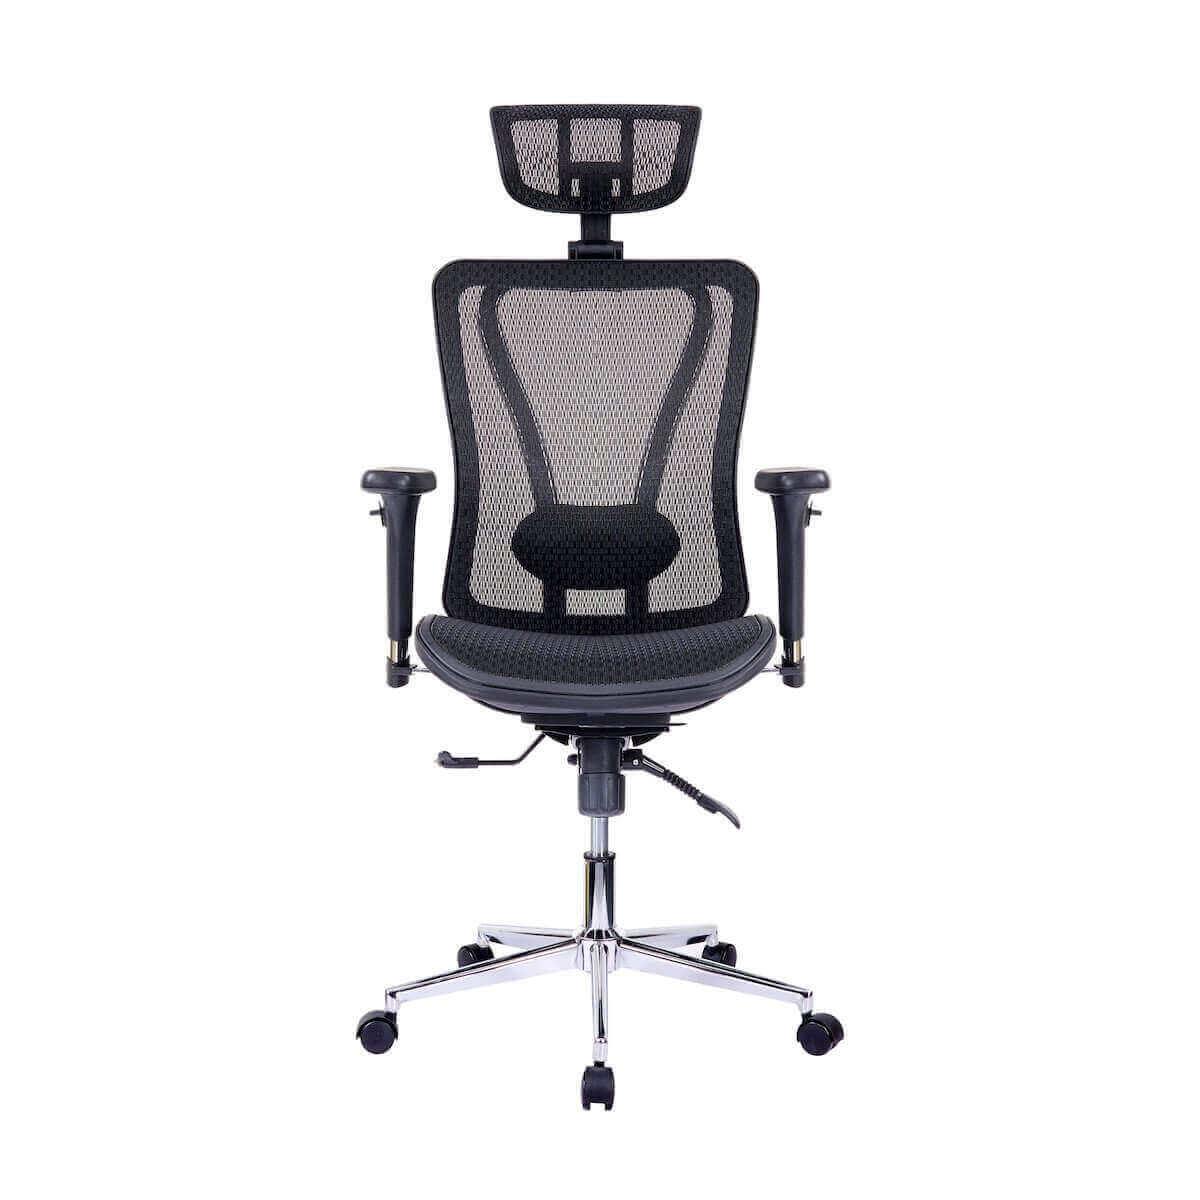 Techni Mobili Black High Back Executive Mesh Office Chair with Arms, Headrest, and Lumbar Support RTA-1009-BK